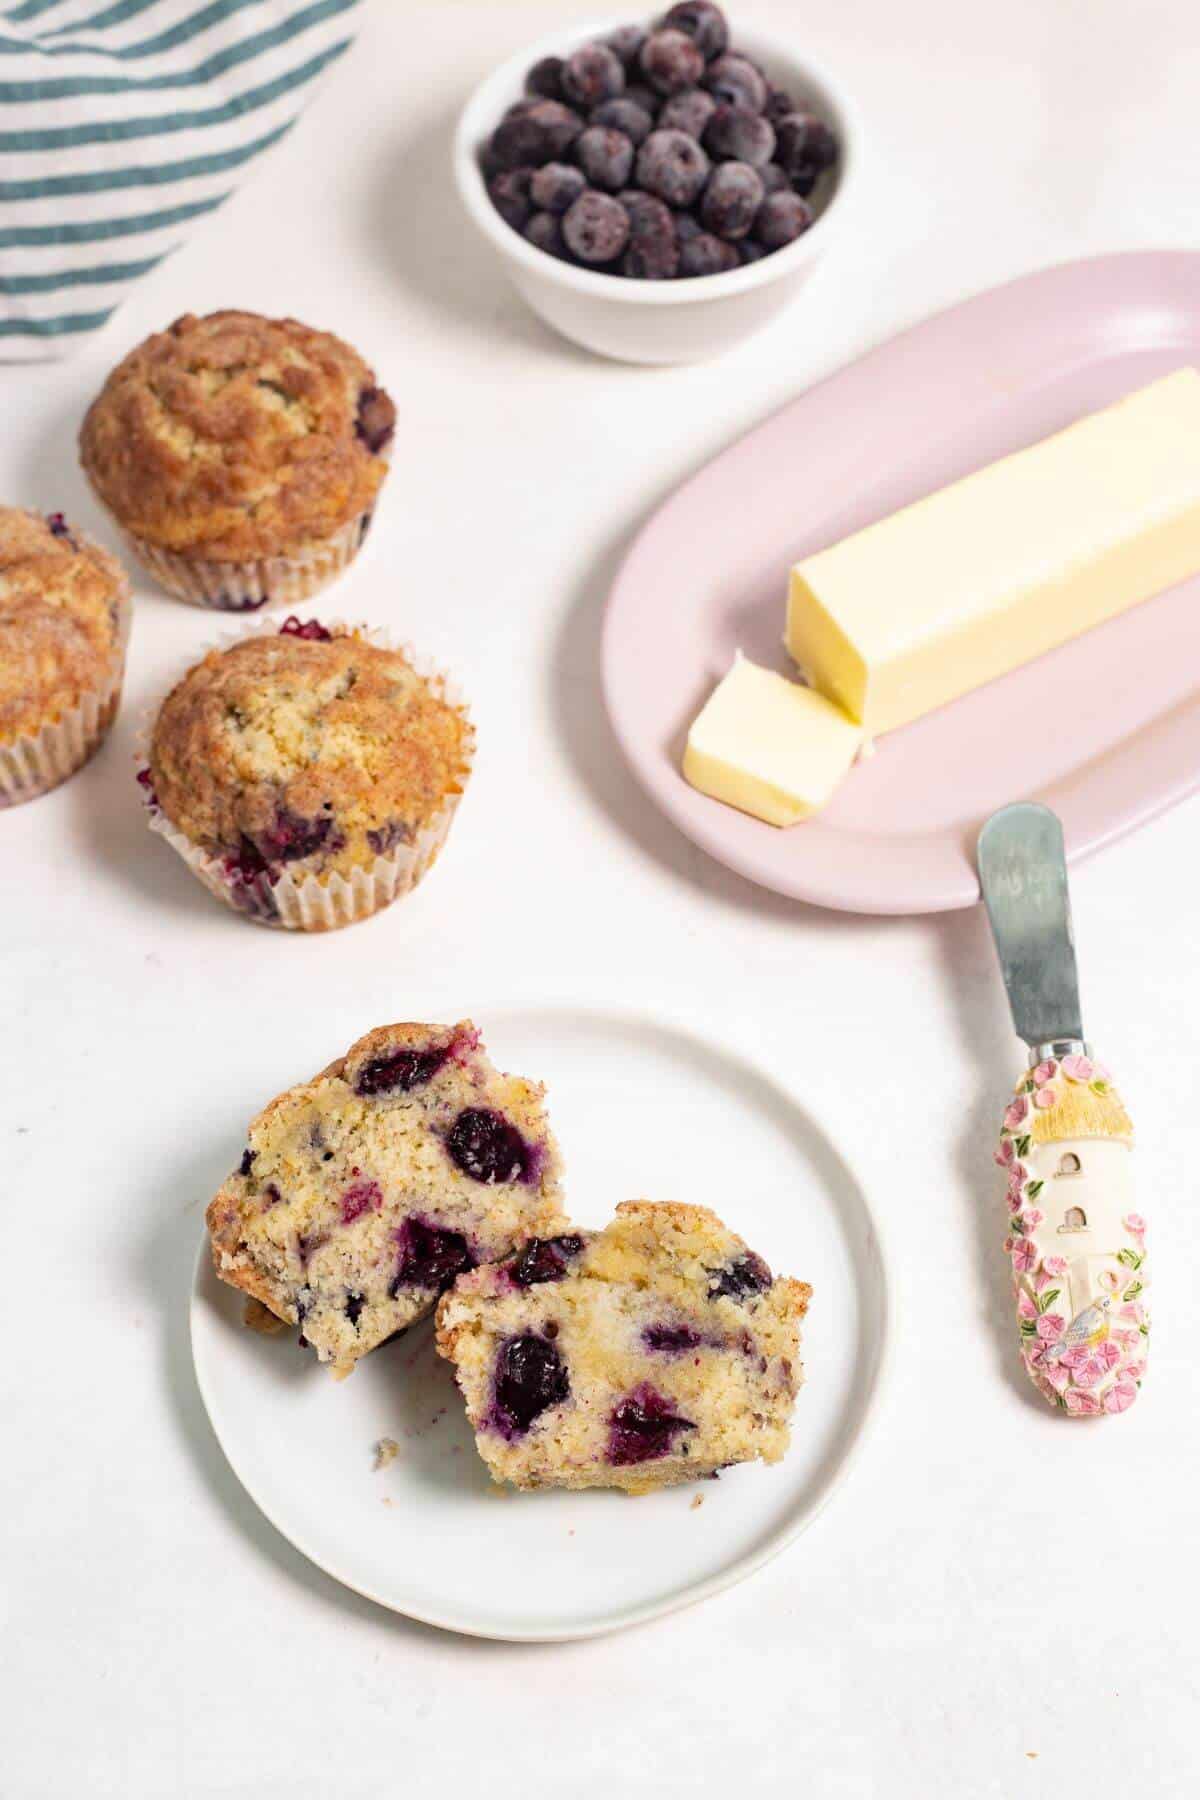 Sliced blueberry muffin on plate with butter, blueberries, and other muffins.